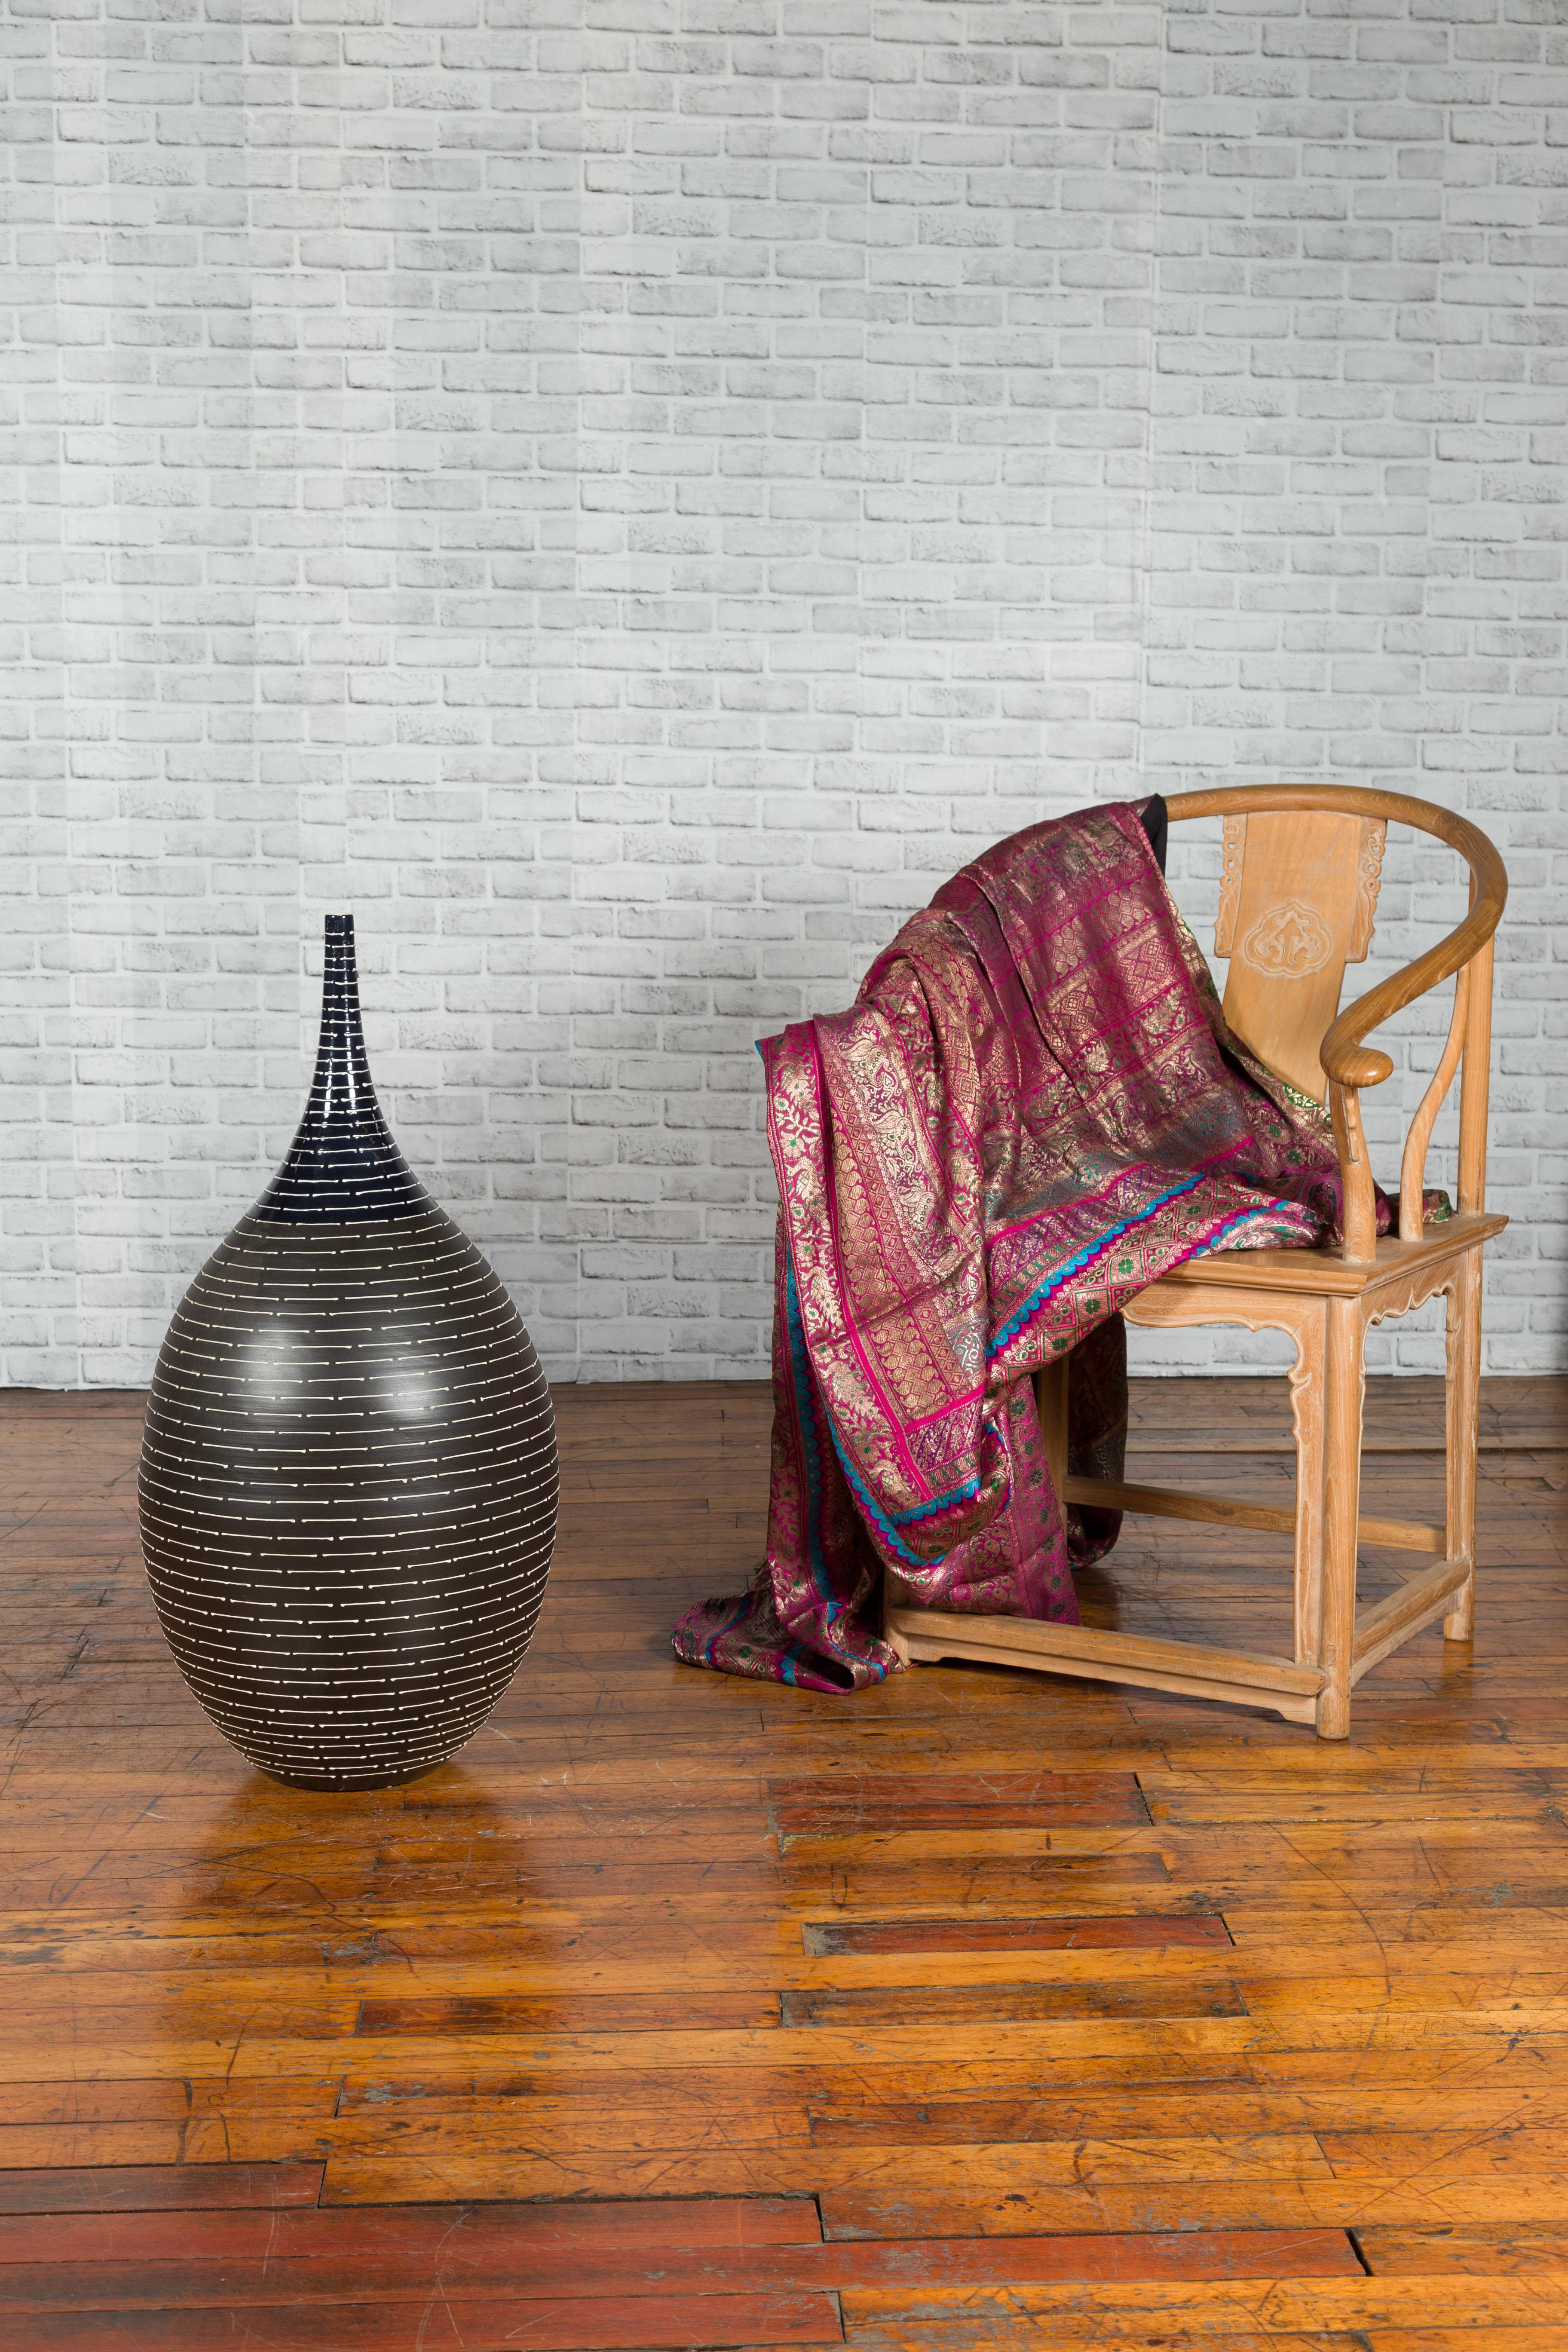 A Thai Chiang Mai contemporary ceramic vase from the Prem Collection with black, white and navy blue tones. Charming our eye with its sleek lines and striated décor, this vase was born in Chiang Mai, northern Thailand. The piece showcases a rounded